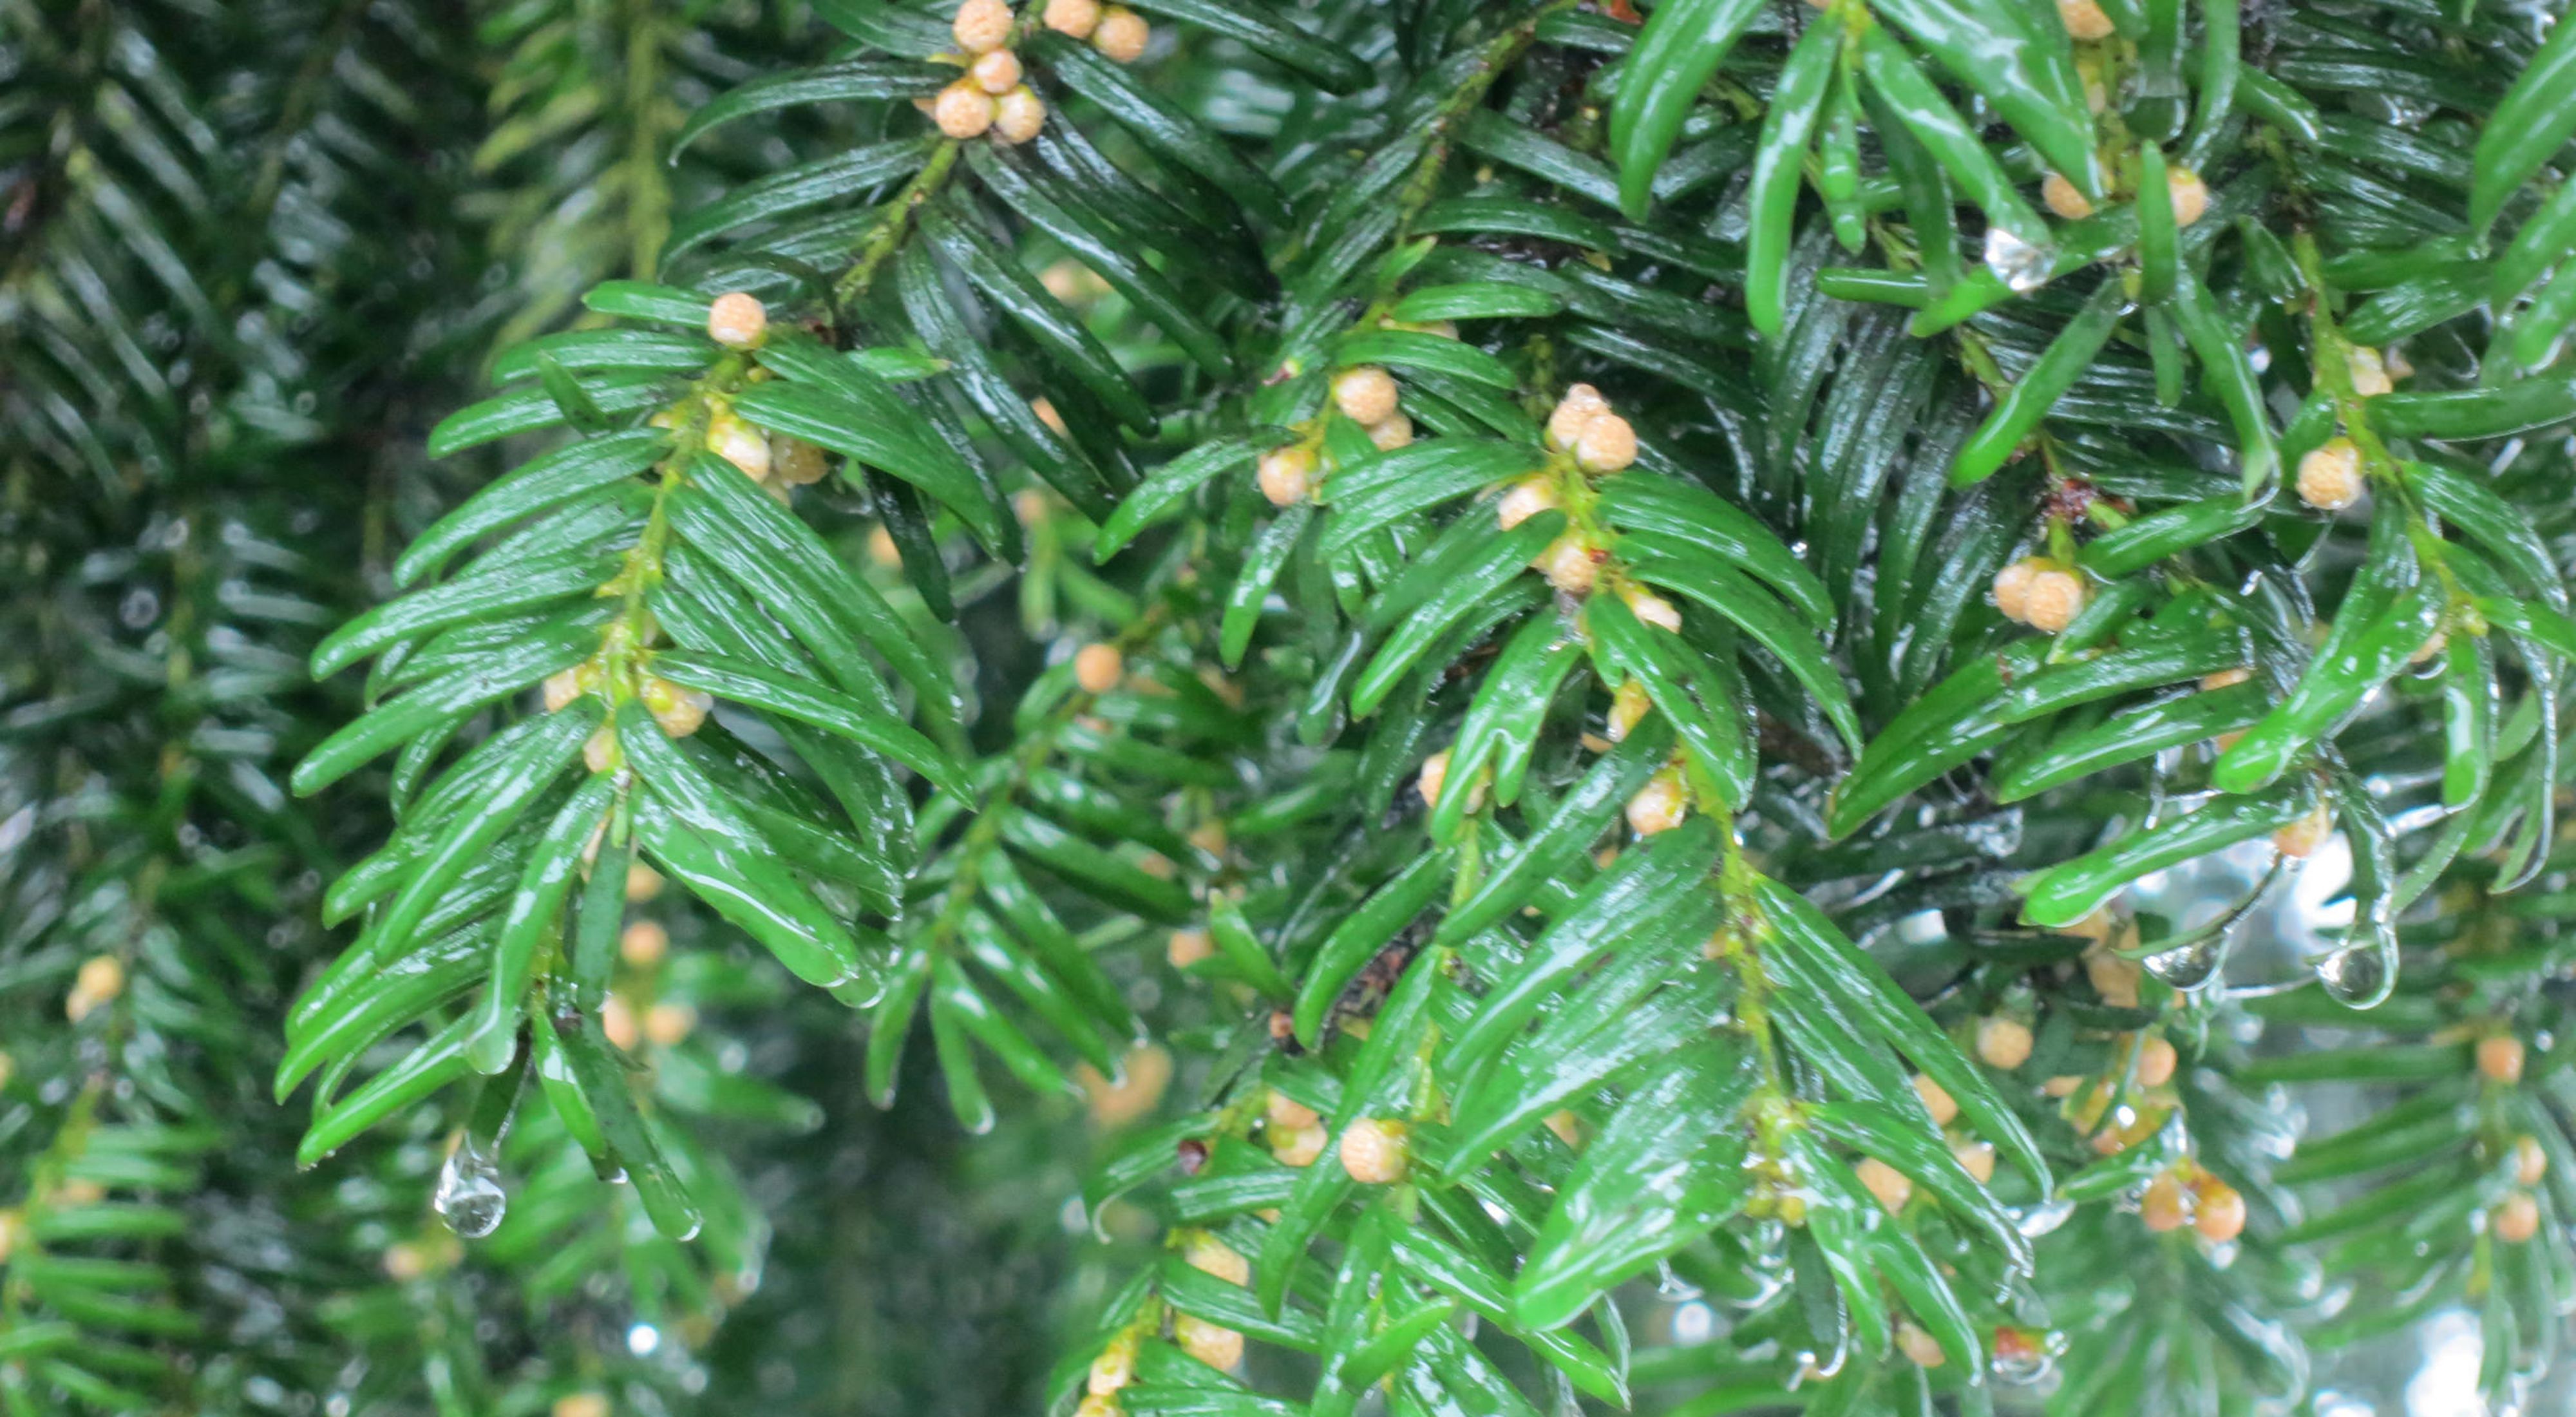 Closeup view of the green needles and yellowish berries of a Canada yew.